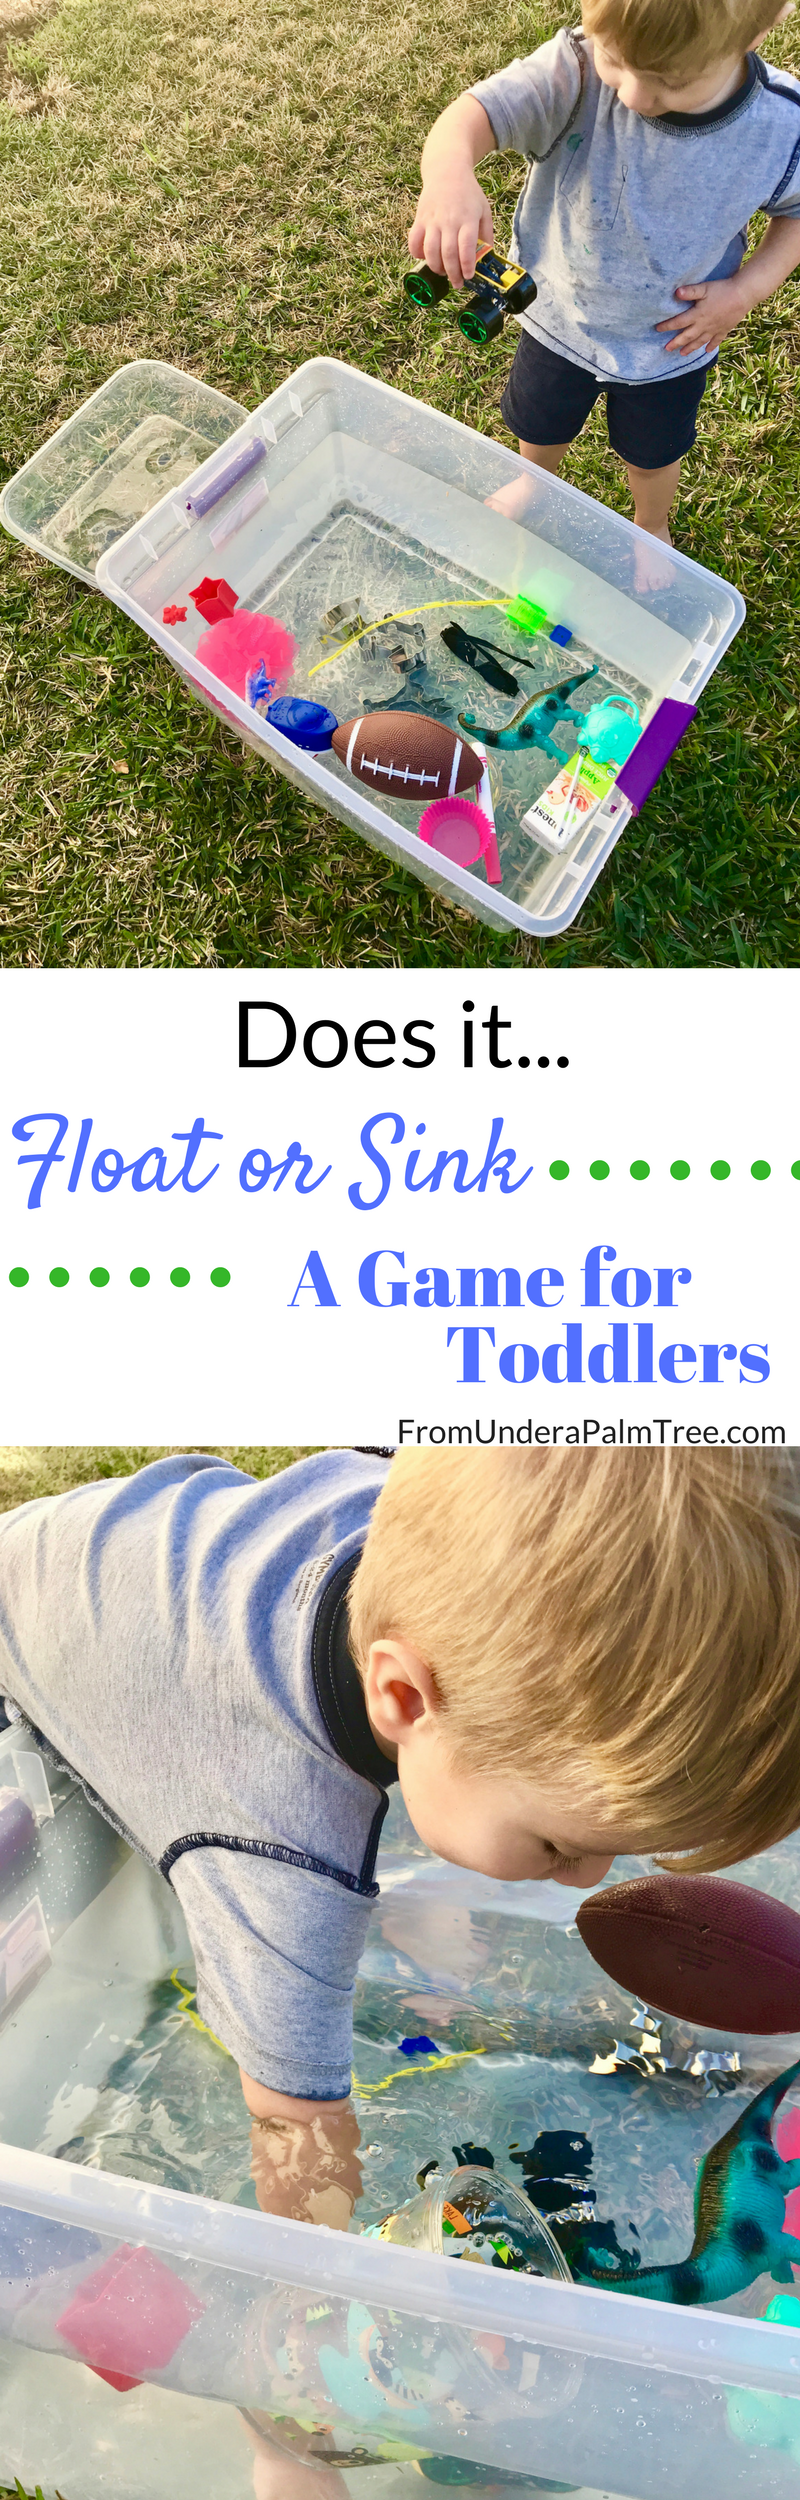 Games for Toddlers | Float or Sink Game for Toddlers | Science Games for Toddlers | toddler games | summer fun for kids | game ideas for toddlers | outdoor games for toddlers | outdoor games for kids | fun outdoor games for kids | kids games | water games for kids | water games for toddlers | science games |